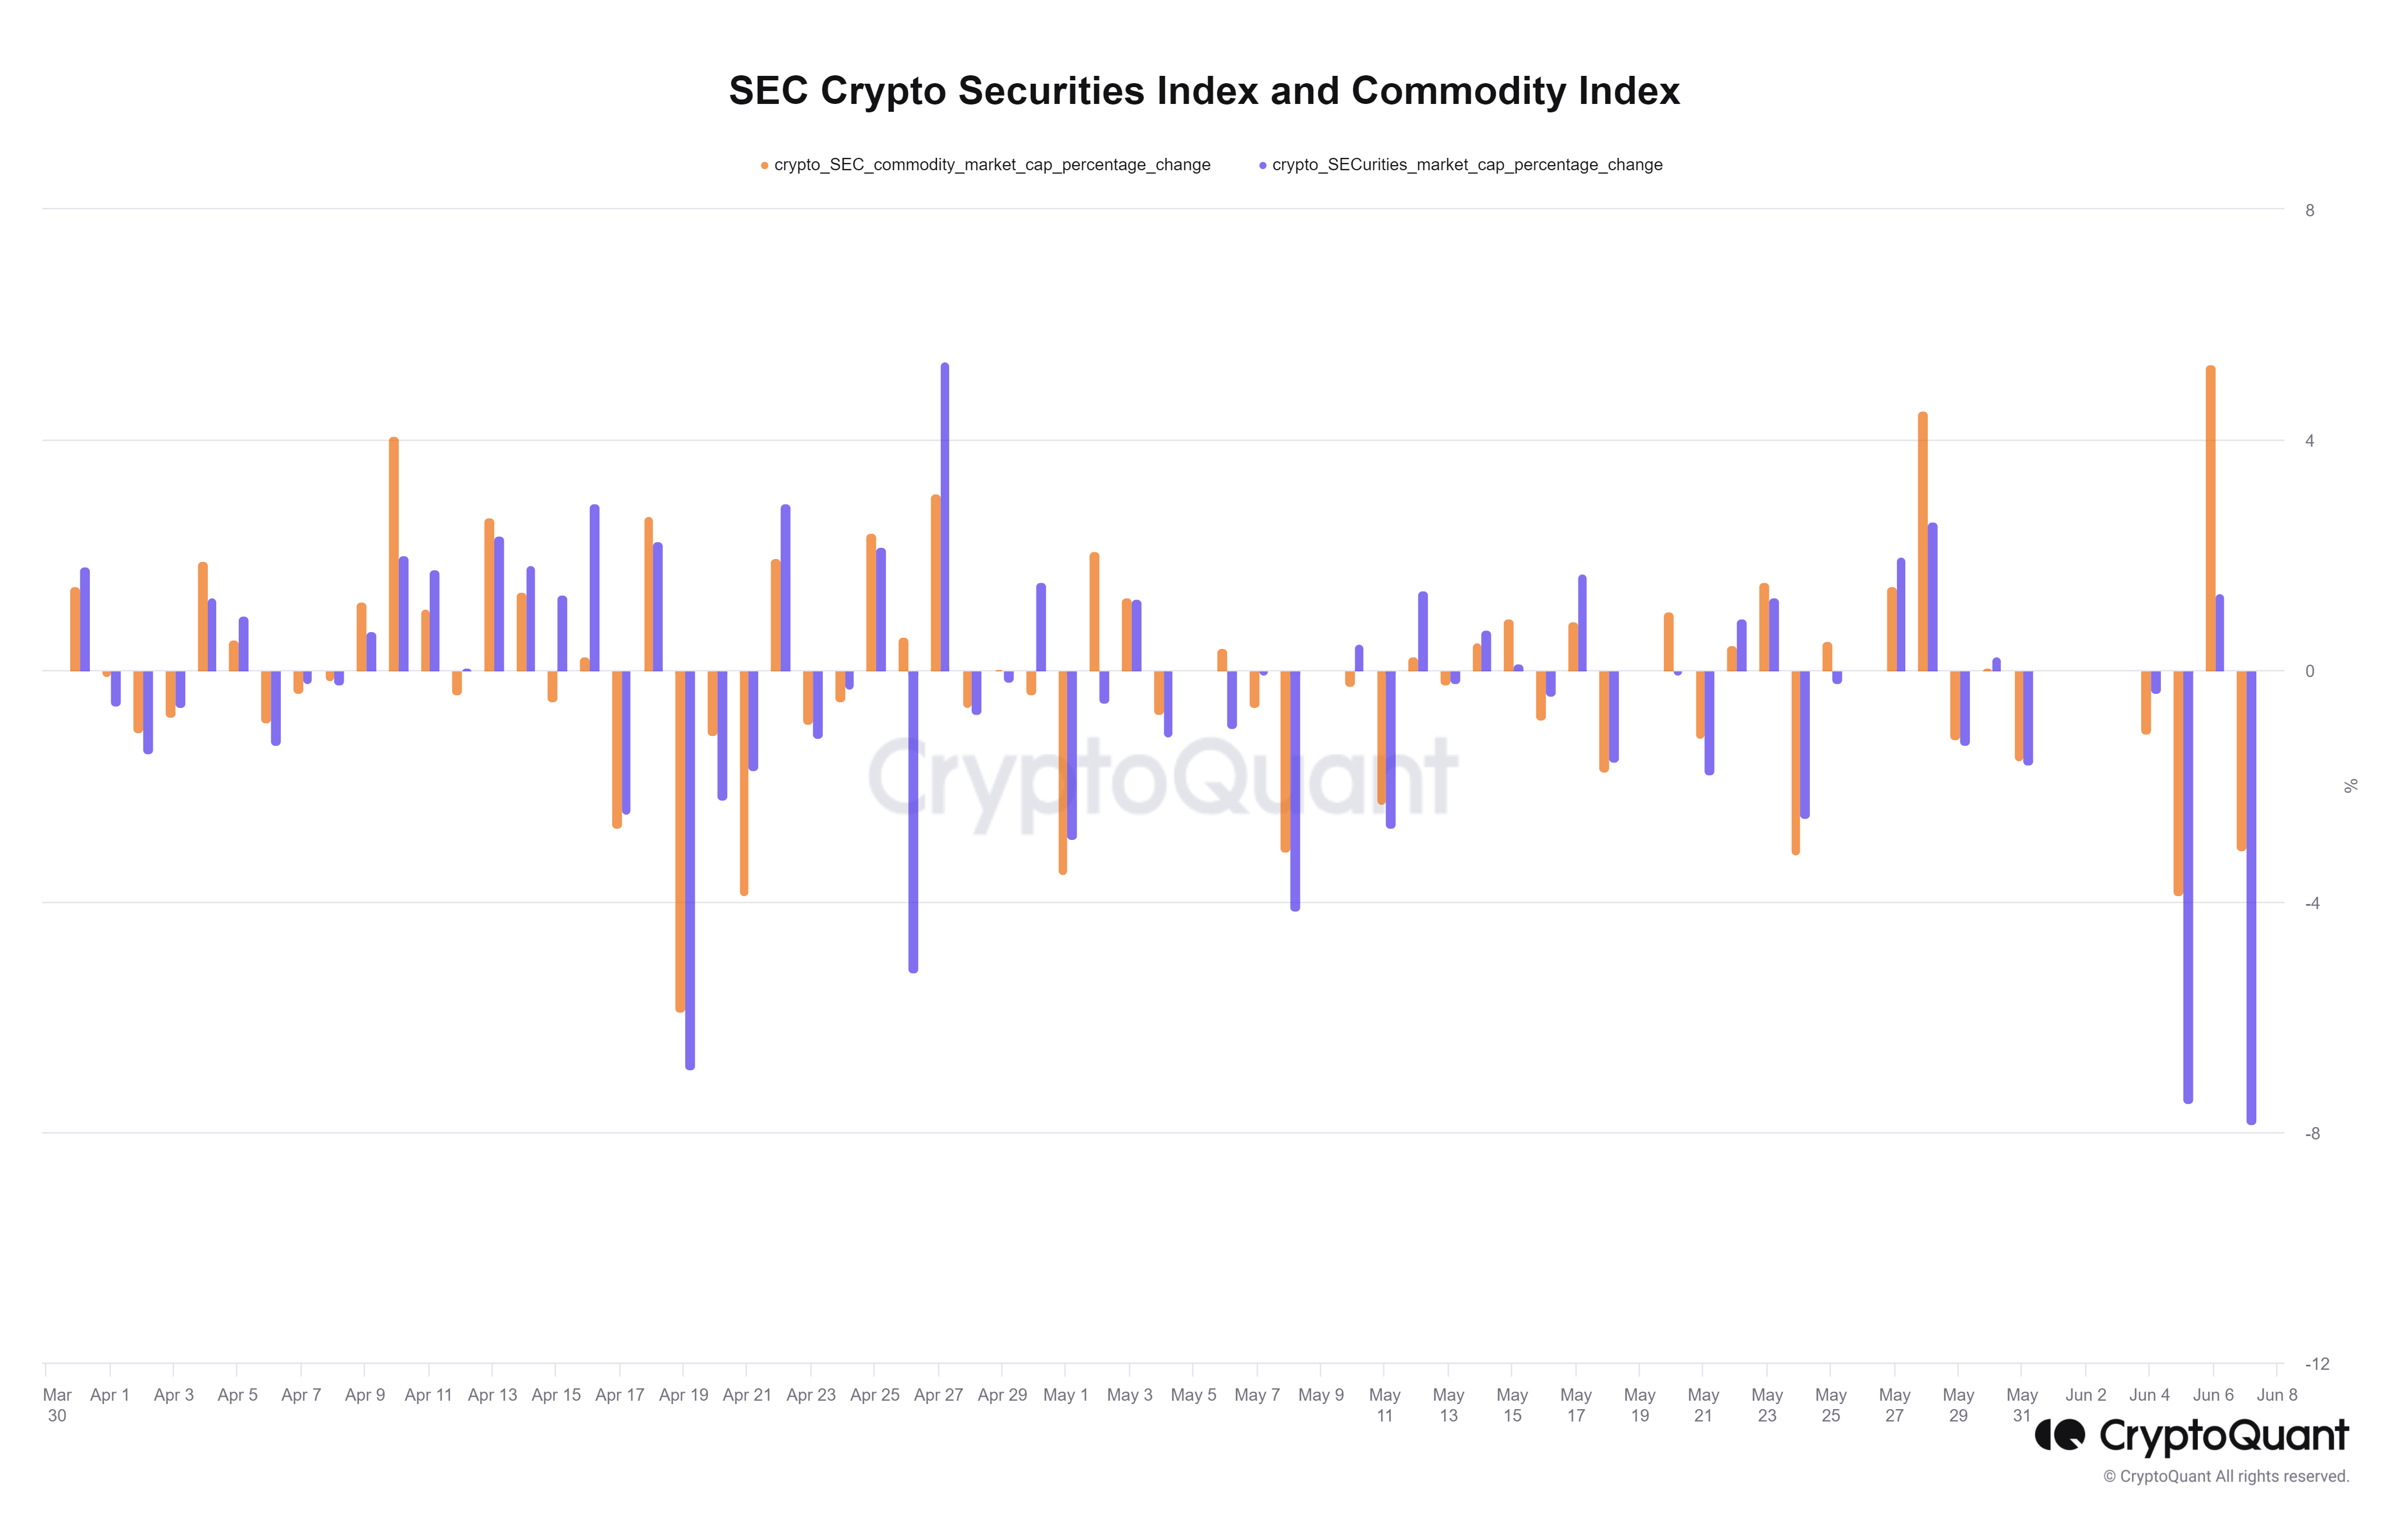 Securities and commodities: (Source: Crypto Quant)